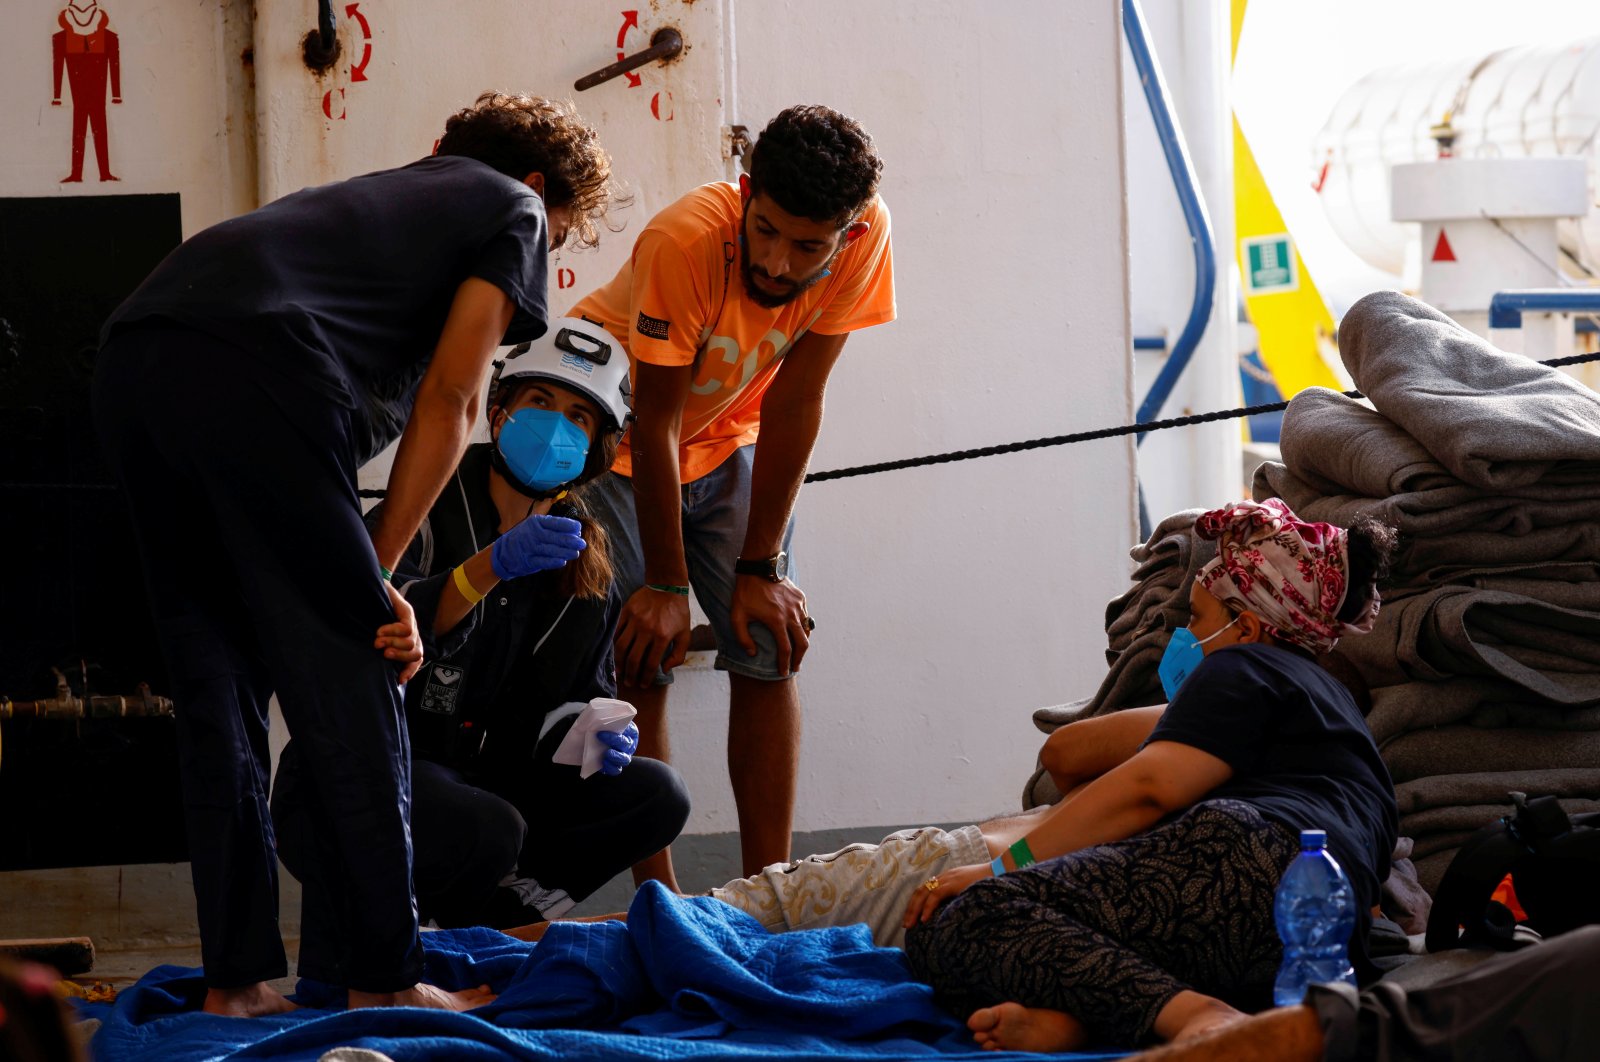 A medic talks with migrants after a migrant fell ill and collapsed on the German NGO migrant rescue ship Sea-Watch 3, while waiting for the last group of migrants to disembark from the ship in Trapani on the island of Sicily, Italy, Aug. 8, 2021. (Reuters Photo)